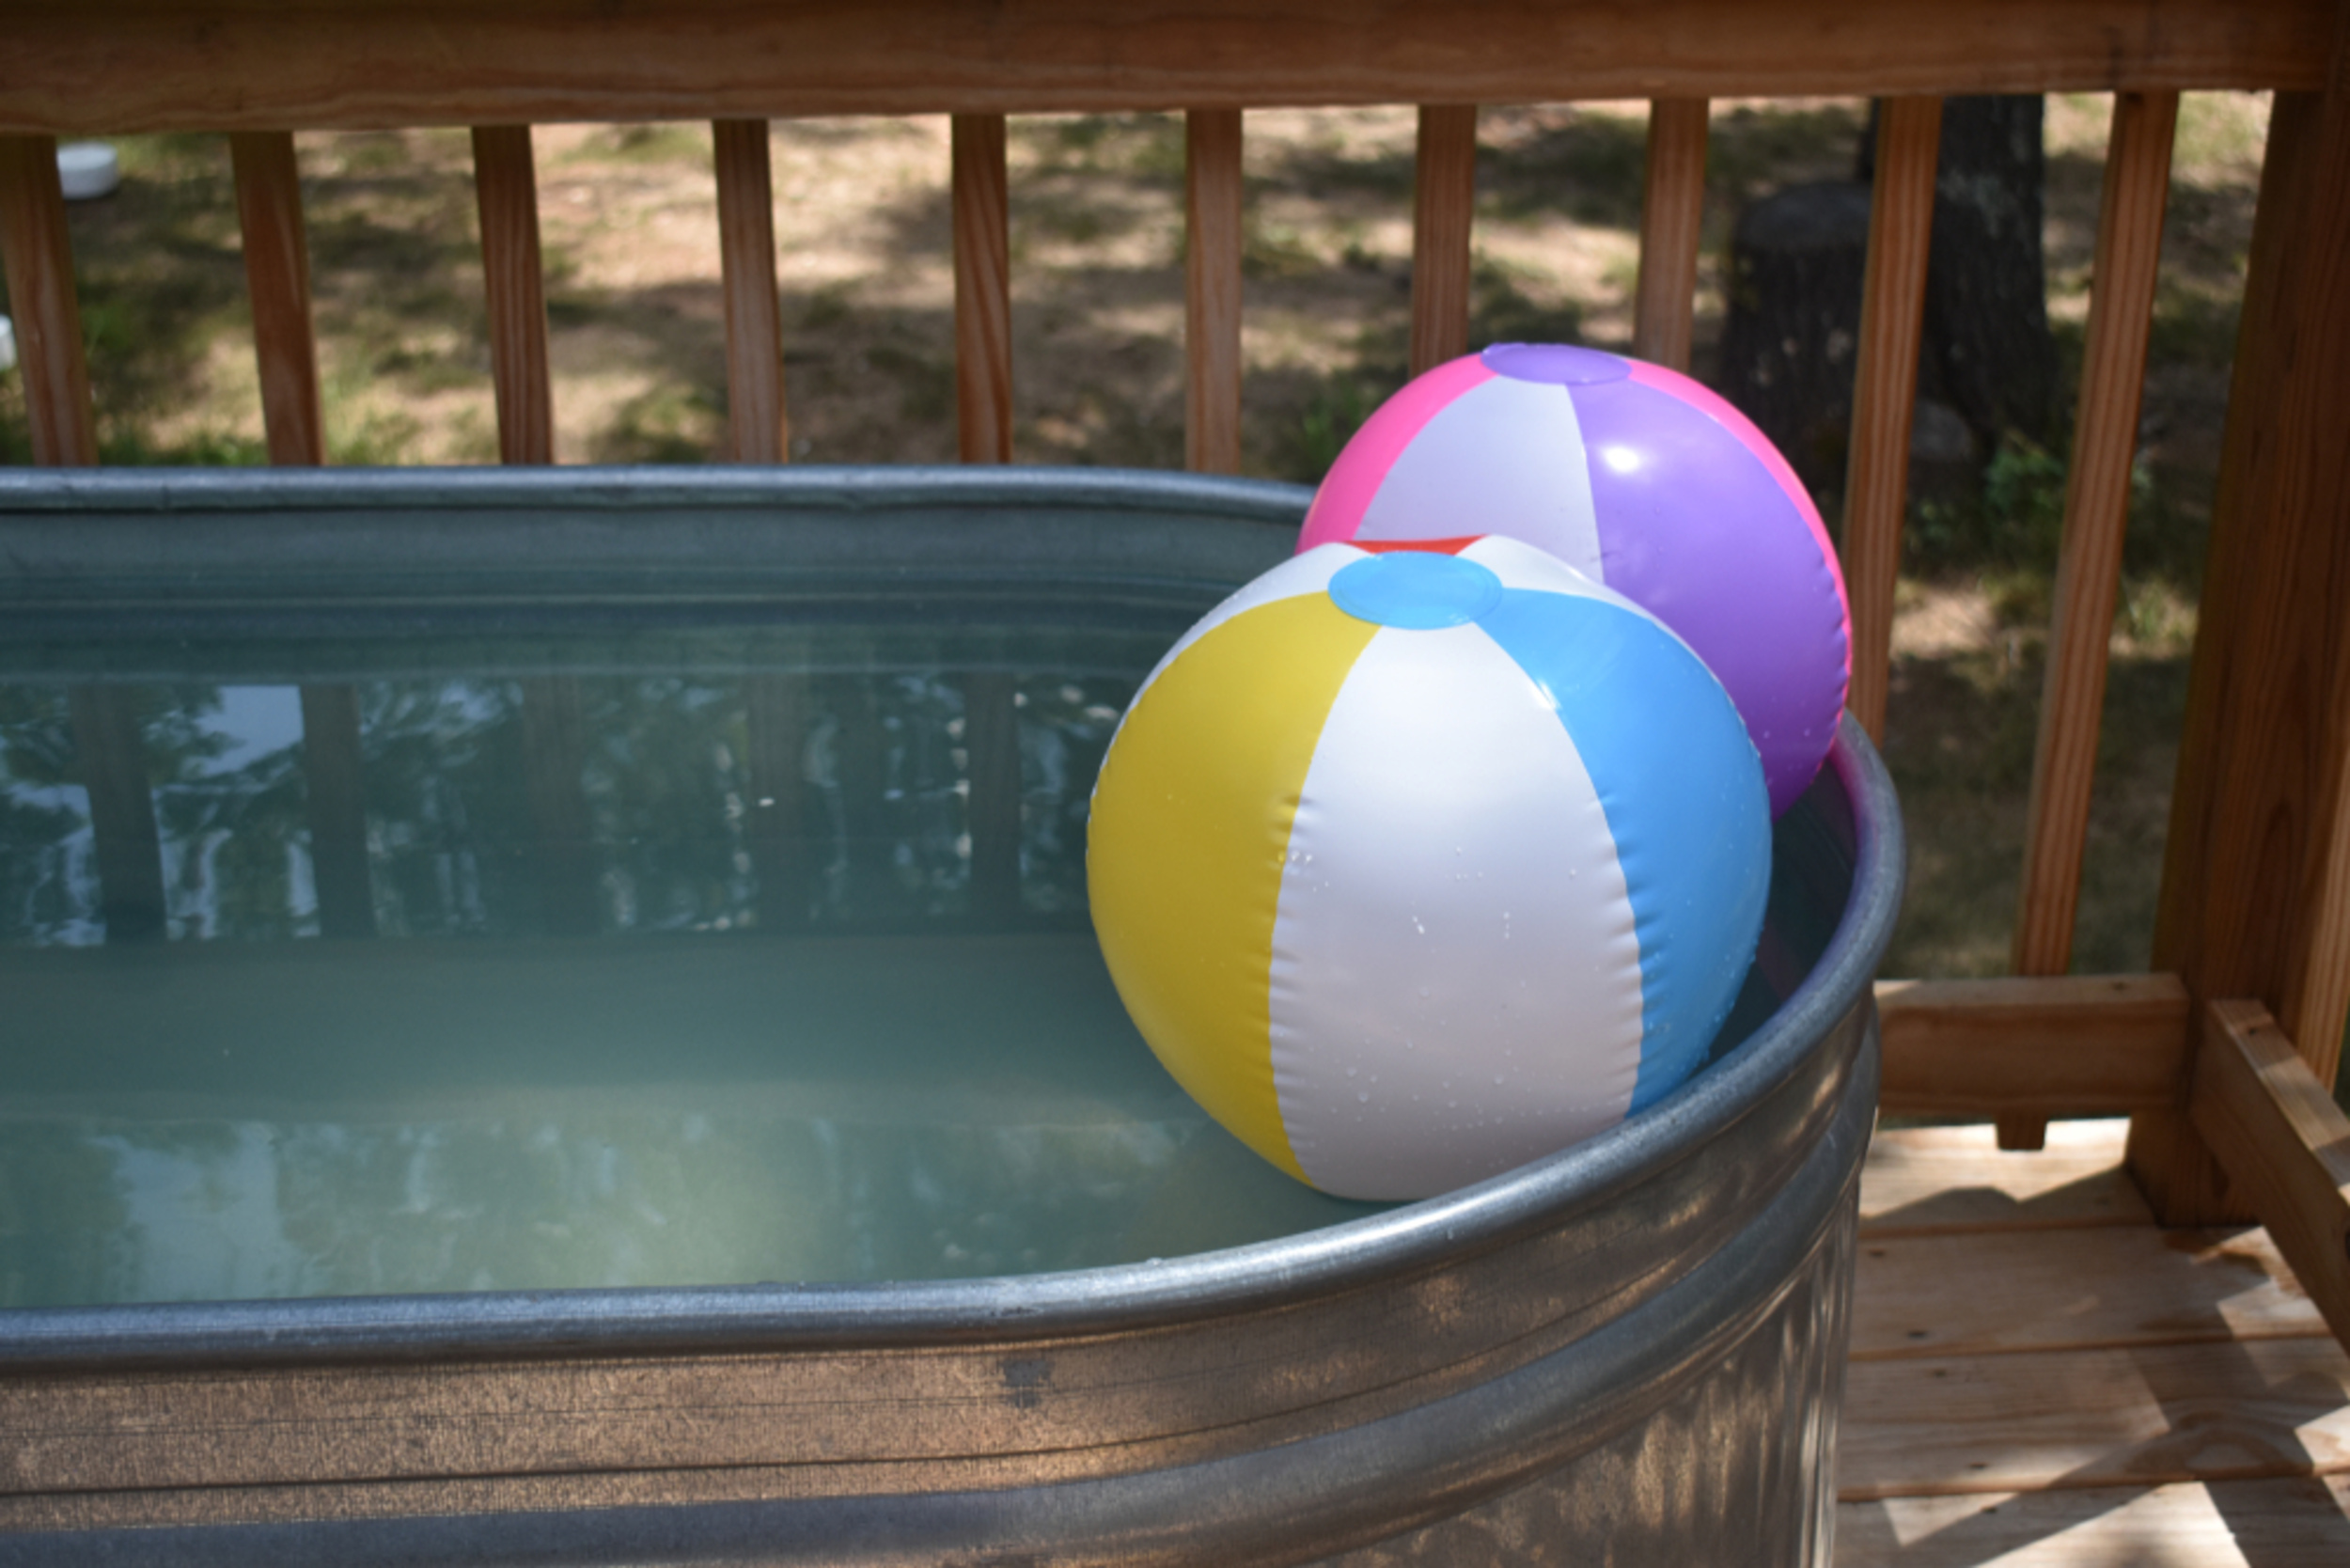 <p>Sometimes, you just need to take a dip during summer's hottest days, but buying and maintaining a pool is an expensive hassle. Stock tank pools have risen in popularity in recent years, and for good reason. They're inexpensive and easy to make, and offer a nice respite on brutally hot days. Check out this <a href="https://www.thespruce.com/diy-stock-tank-pool-7373093">DIY tutorial</a> for more tips. </p><p>You may also like: <a href='https://www.yardbarker.com/lifestyle/articles/20_of_the_best_road_trips_in_europe/s1__39980483'>20 of the best road trips in Europe</a></p>